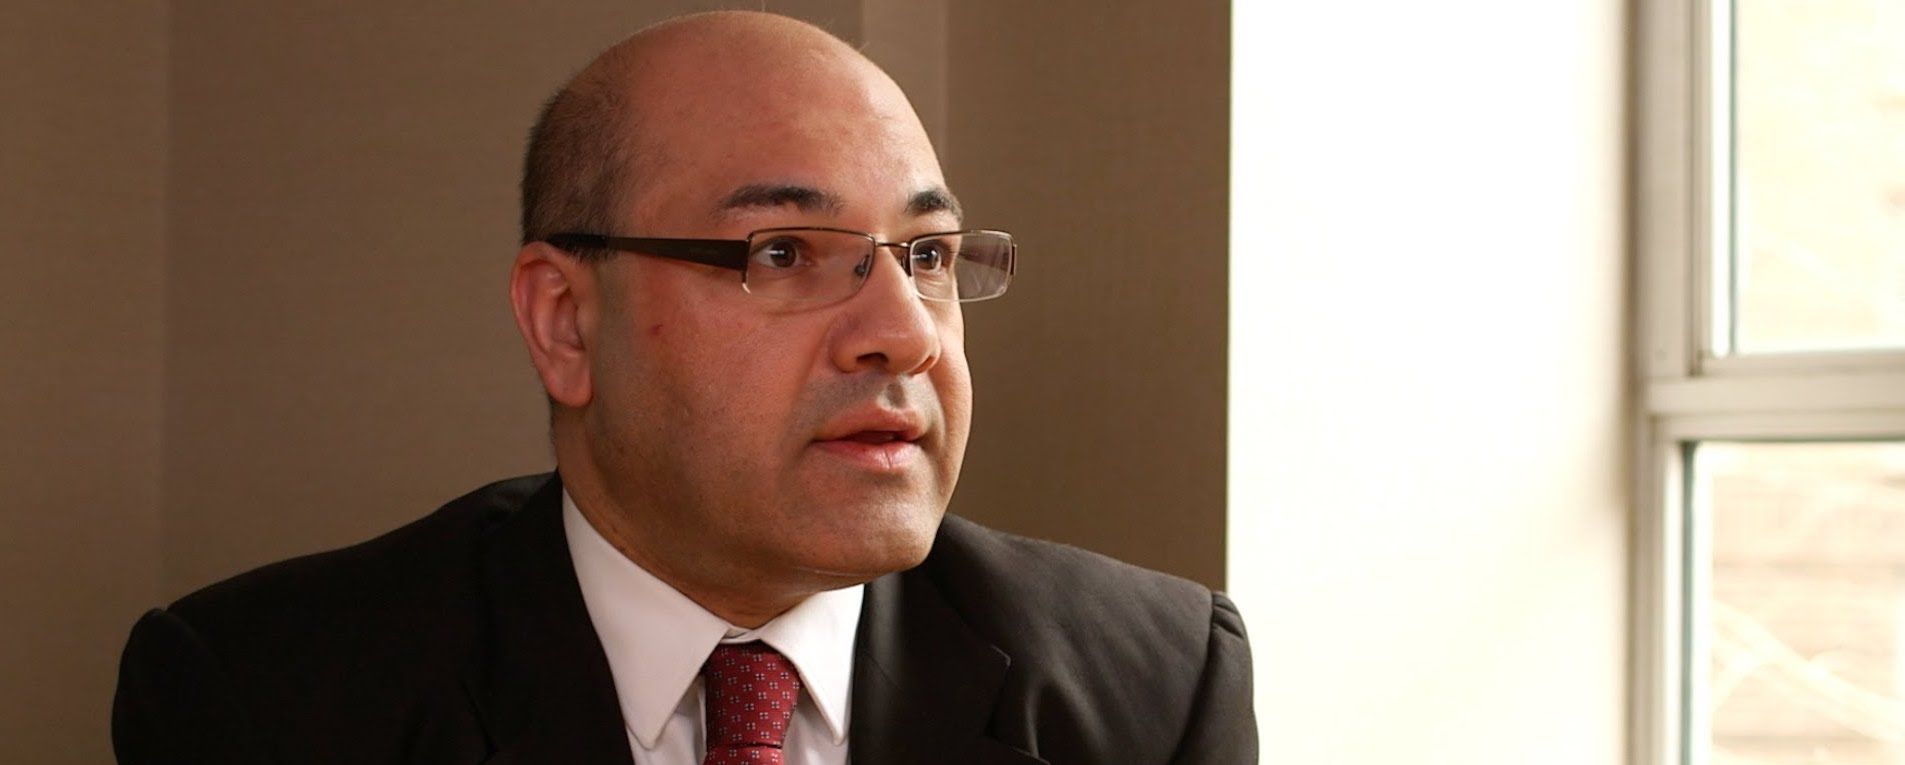 Iraq's Ambassador to the United States, Lukman Faily, Updates Blogs of War on the ISIL Threat